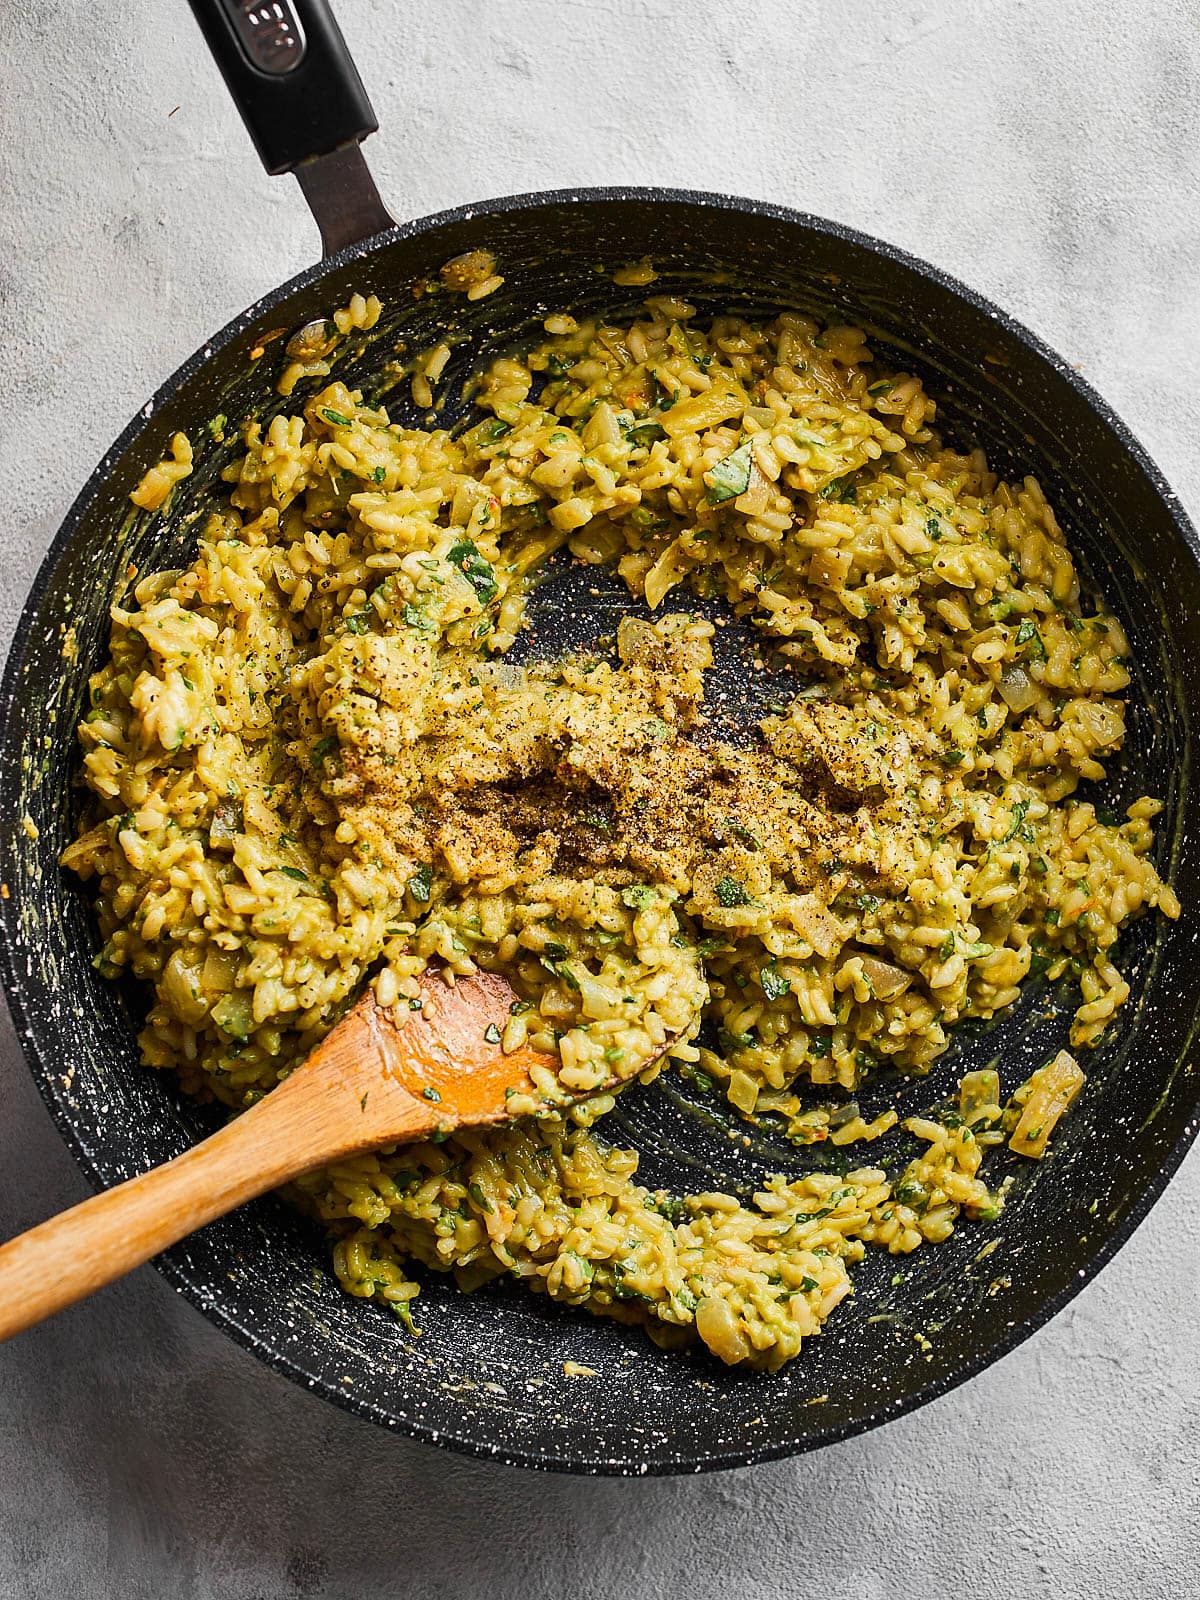 Stirring and seasoning the avocado risotto in the pan